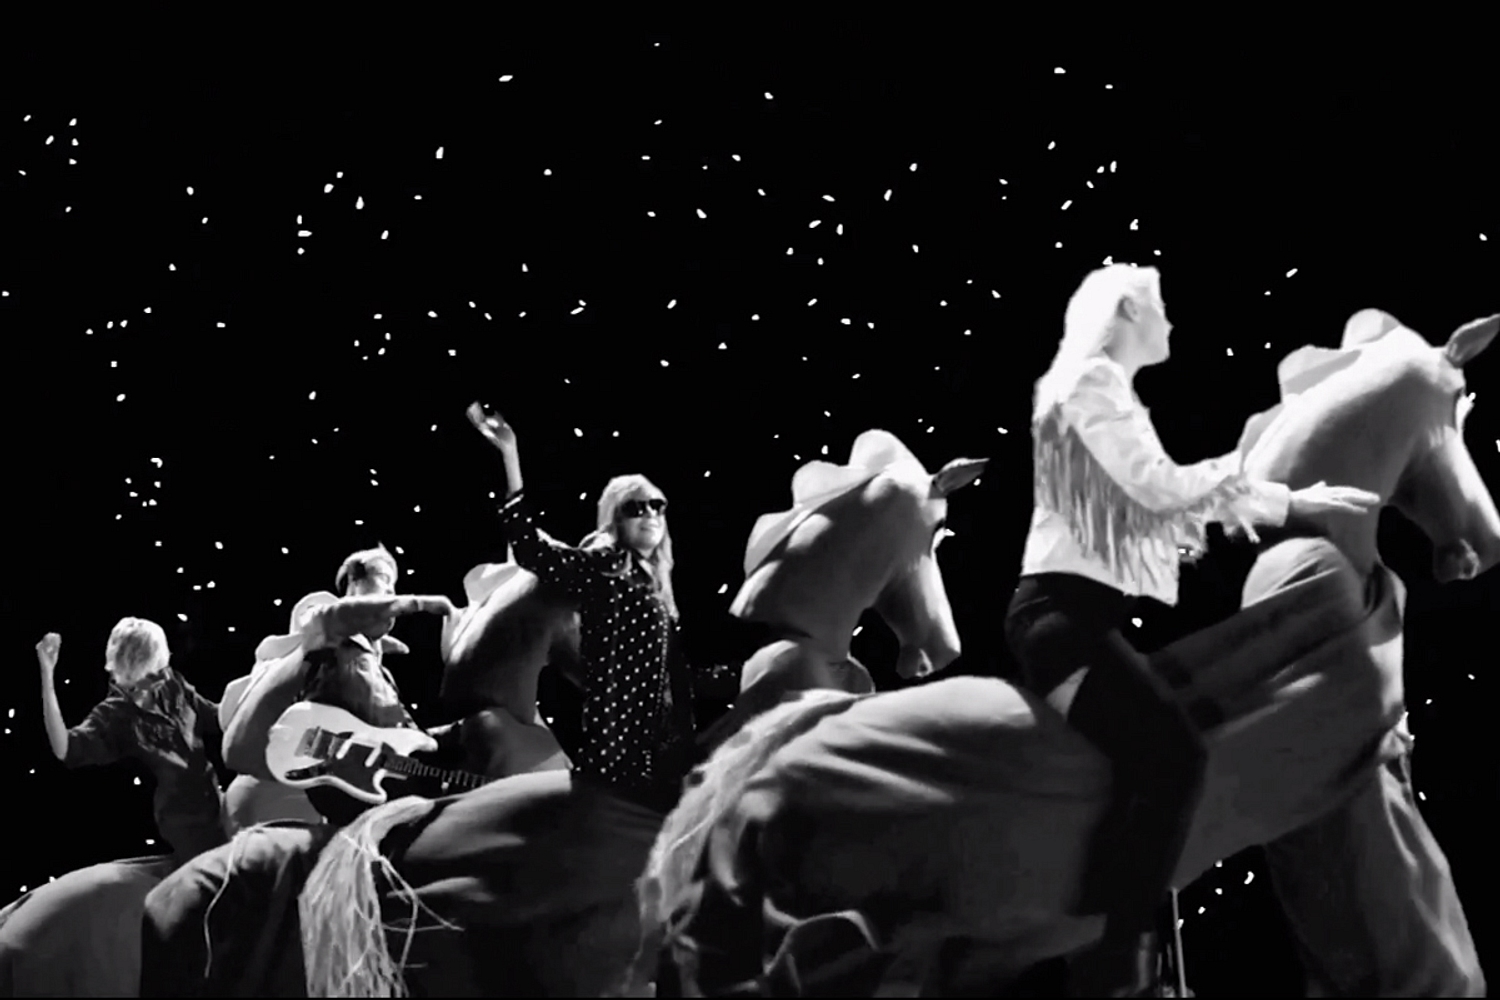 White Lung unveil insane new ‘In Your Home’ video